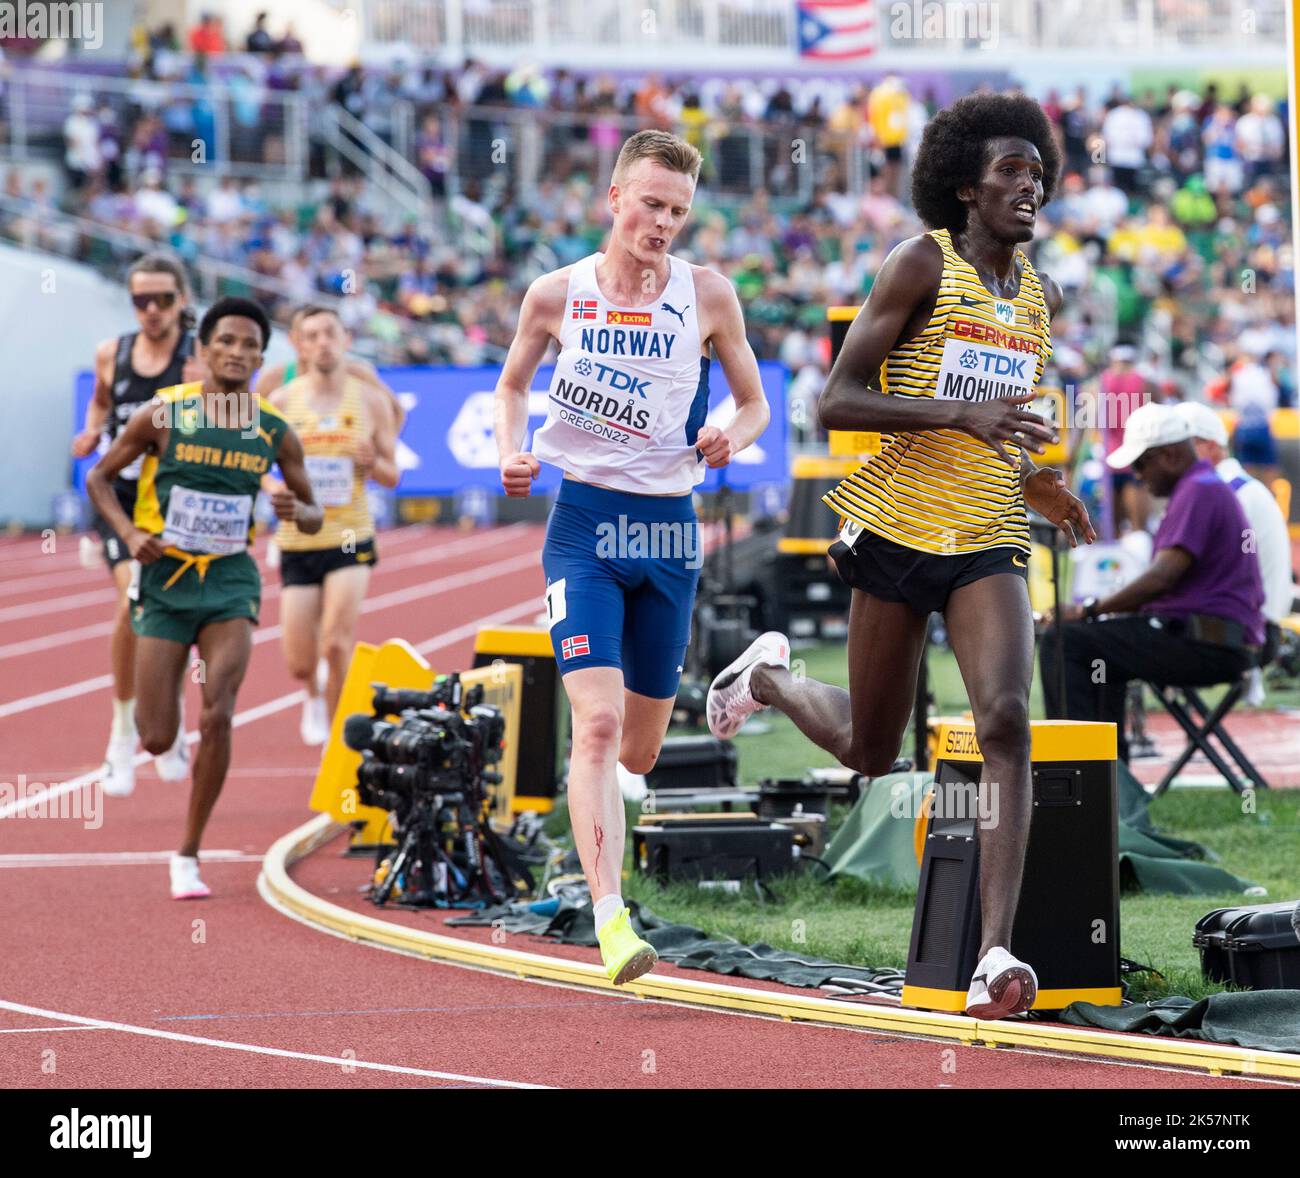 Narve Gilje Nordas of Norway and Mohamed Mohumed of Germany competing in the men’s 5000m heats at the World Athletics Championships, Hayward Field, Eu Stock Photo